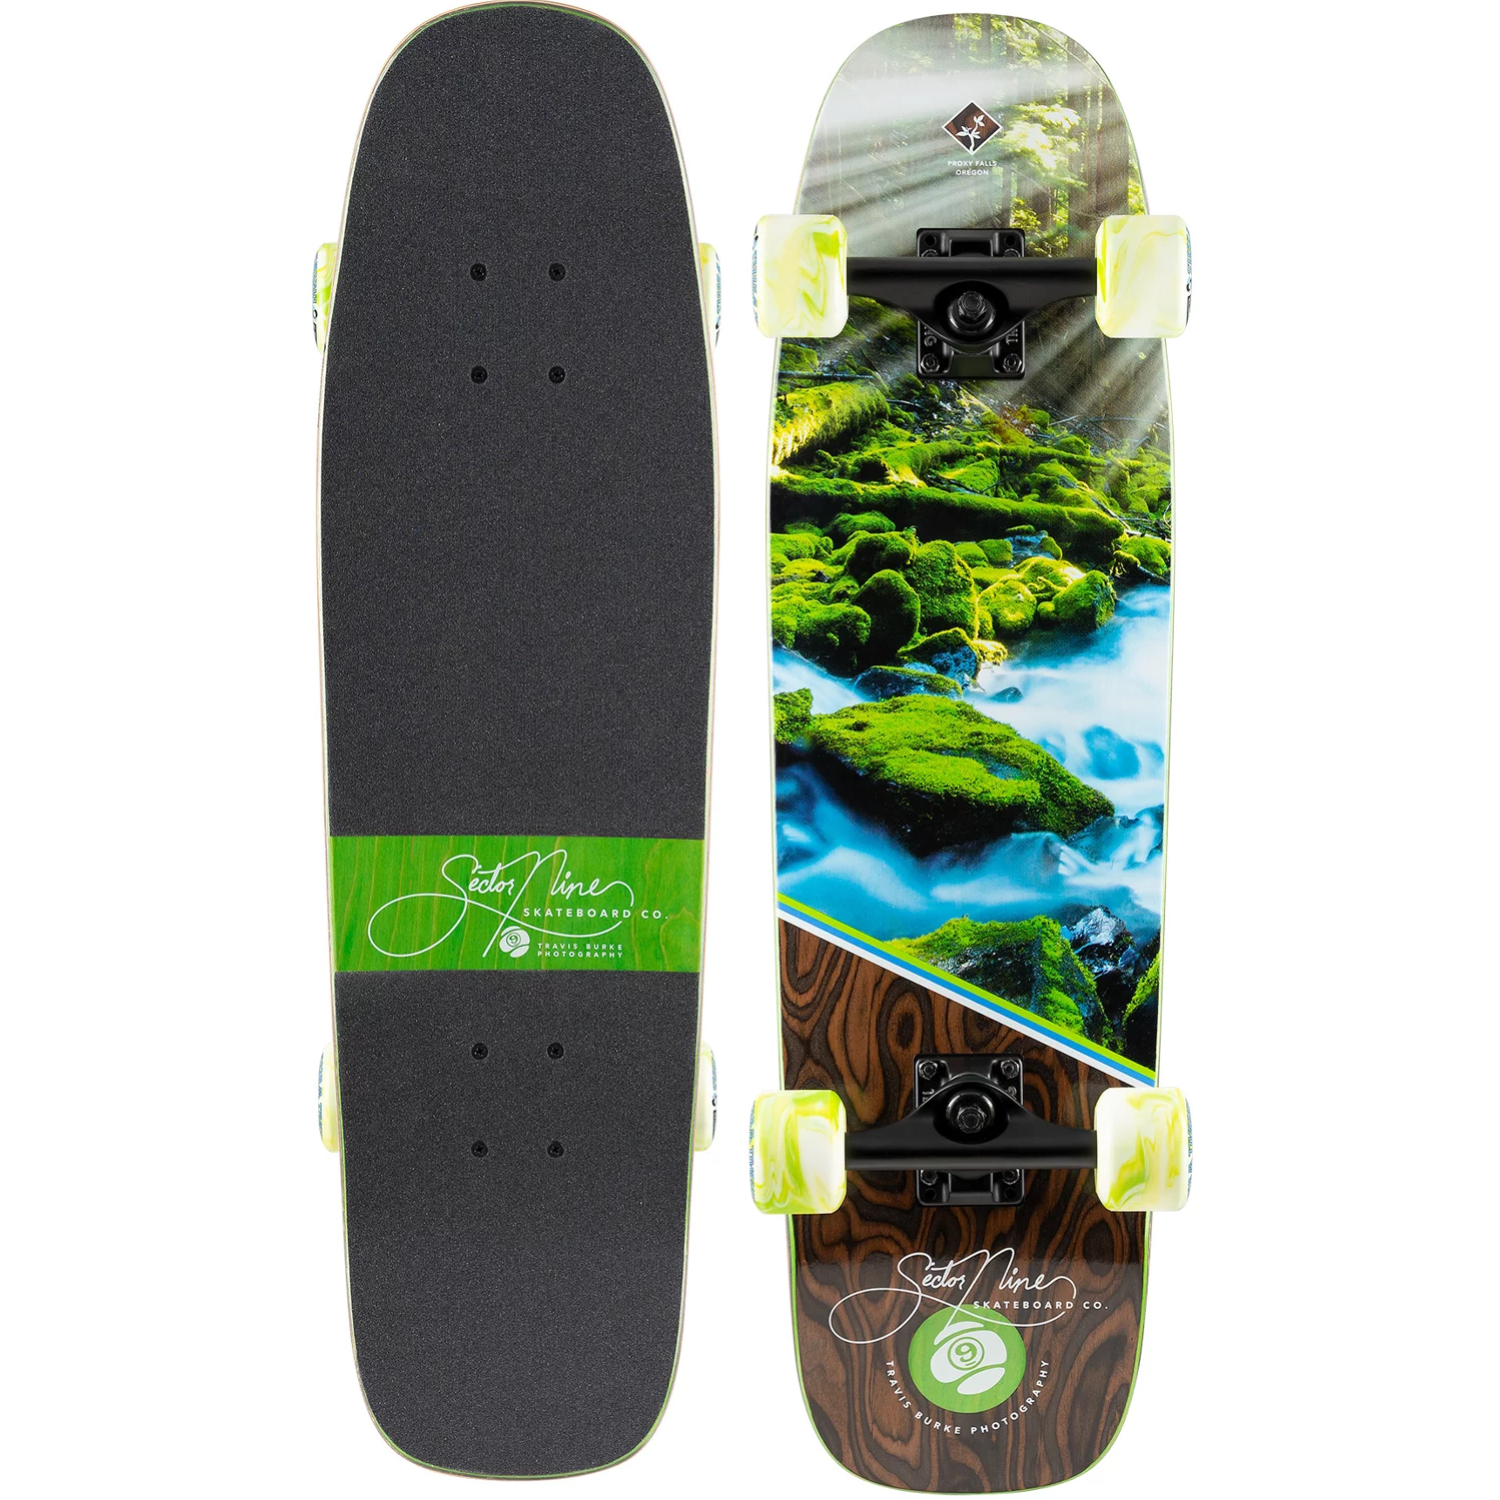 Cruiser Sector 9 Cape Roundhouse - 8.375"